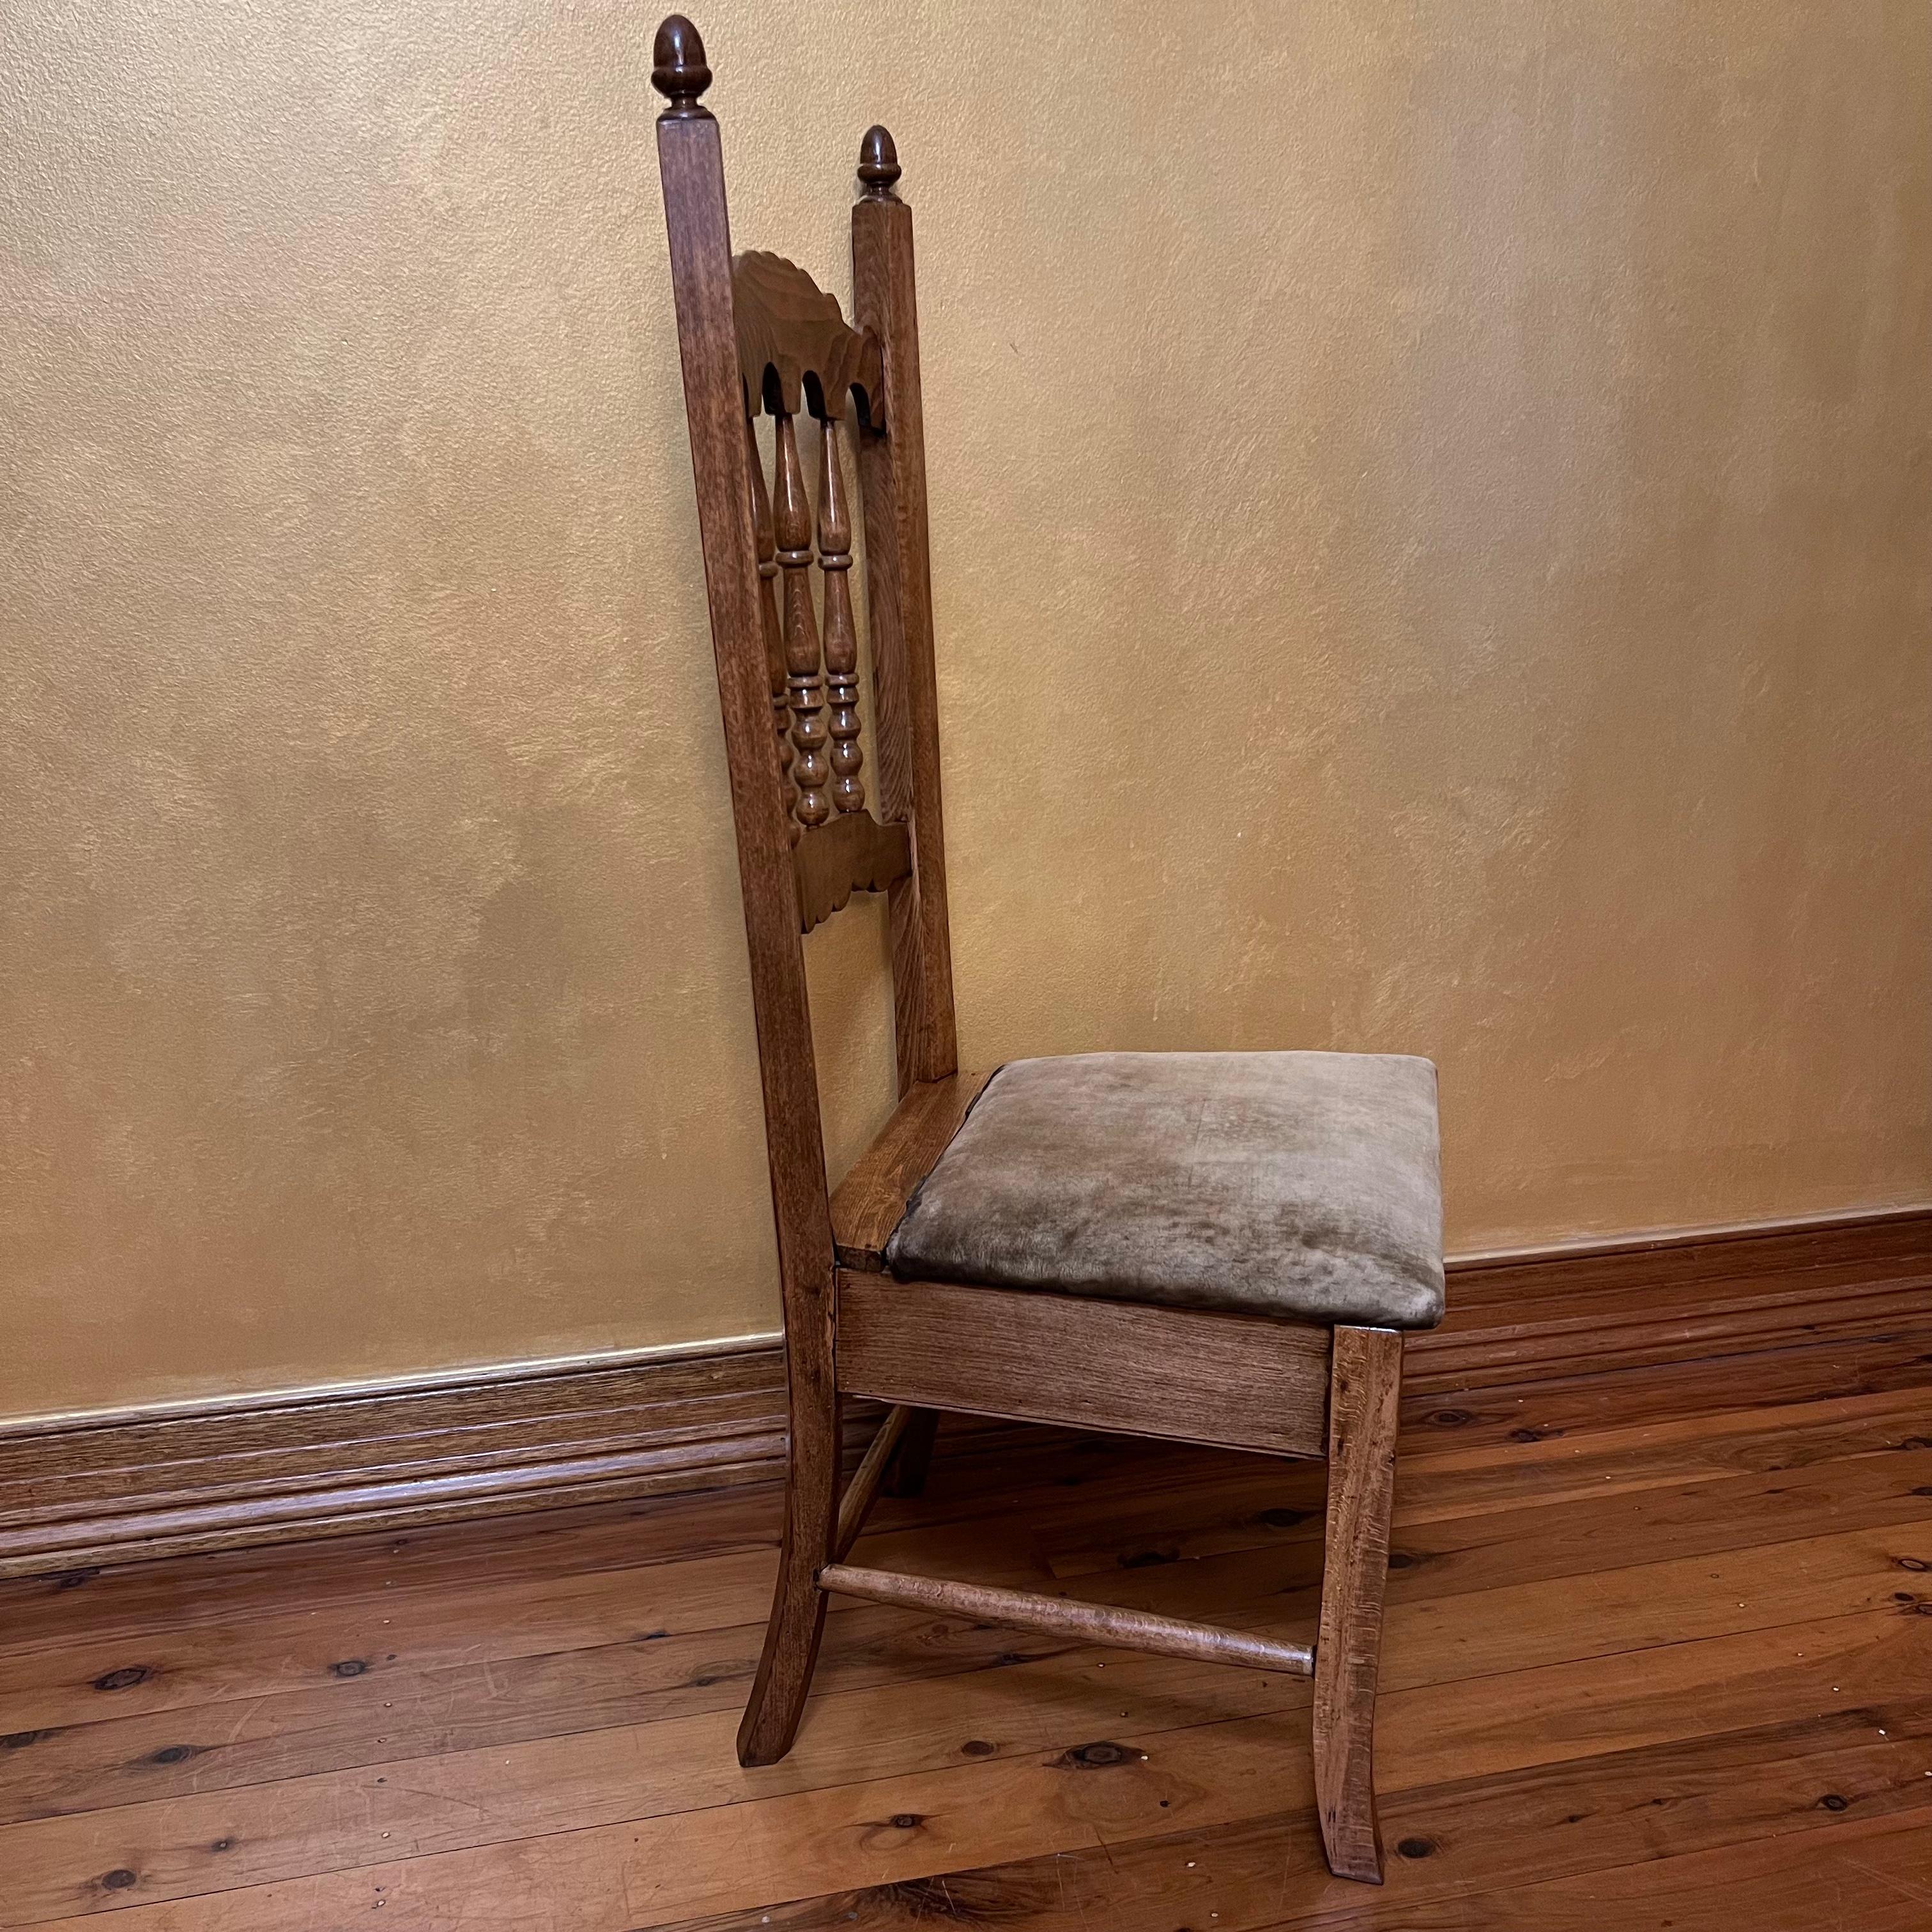 Velvet green seat, seat lifts with a compartment, slight ware to corner edge of velvet seat, has been French polished.

Material: Oak

Country Of Origin:  France

Measurements 97cm high, 40cm length, 36cm width, 35seat hight, 

Antiques Yeah offers